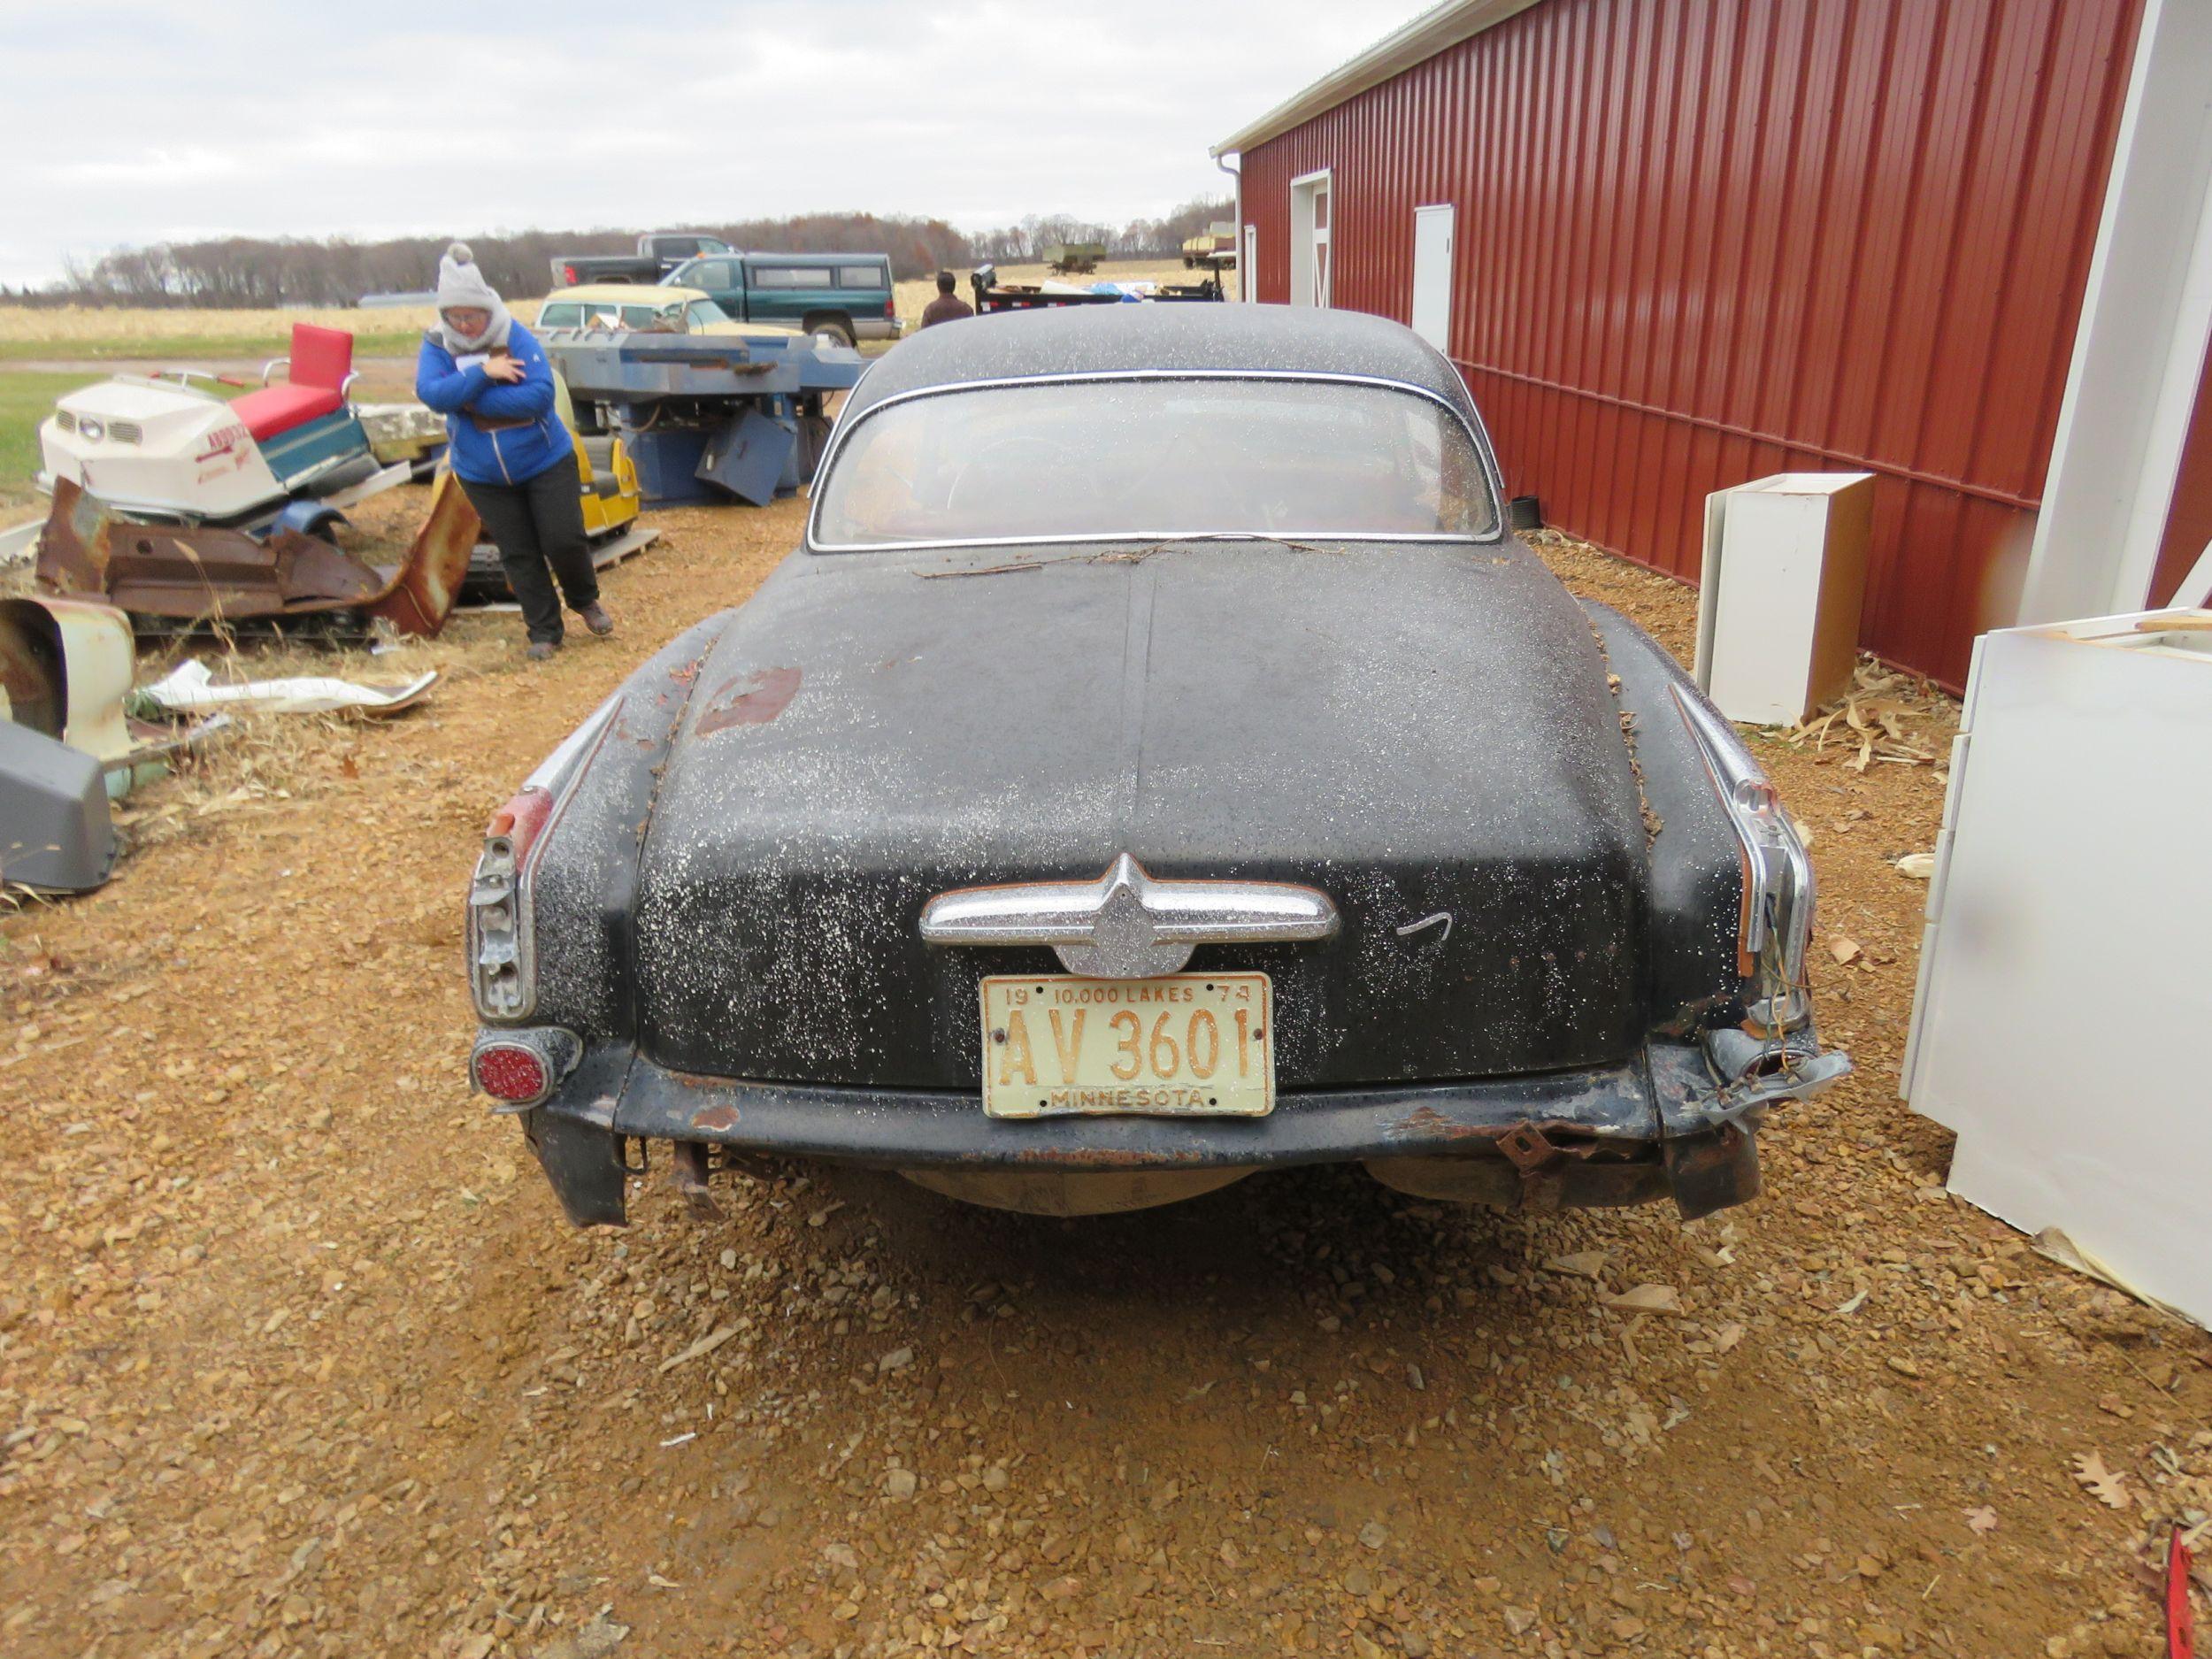 Borgward Coupe for project or parts